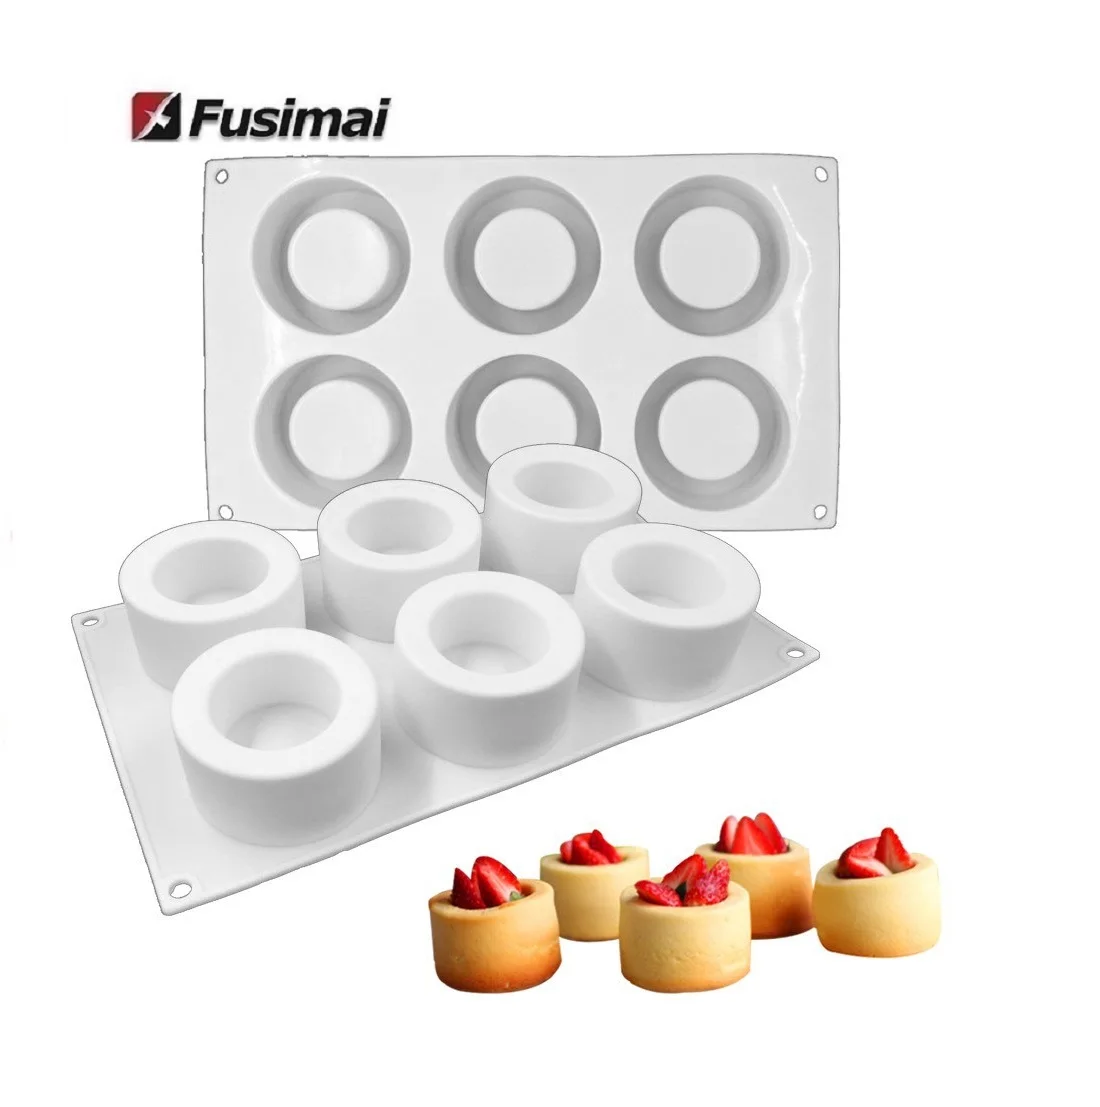 

Fusimai 3d Baking Pastry Chocolate French Dessert 6 Holes Hollow Cylinder Pudding Mousse Cake Silicone Mold, As shown in the figure below